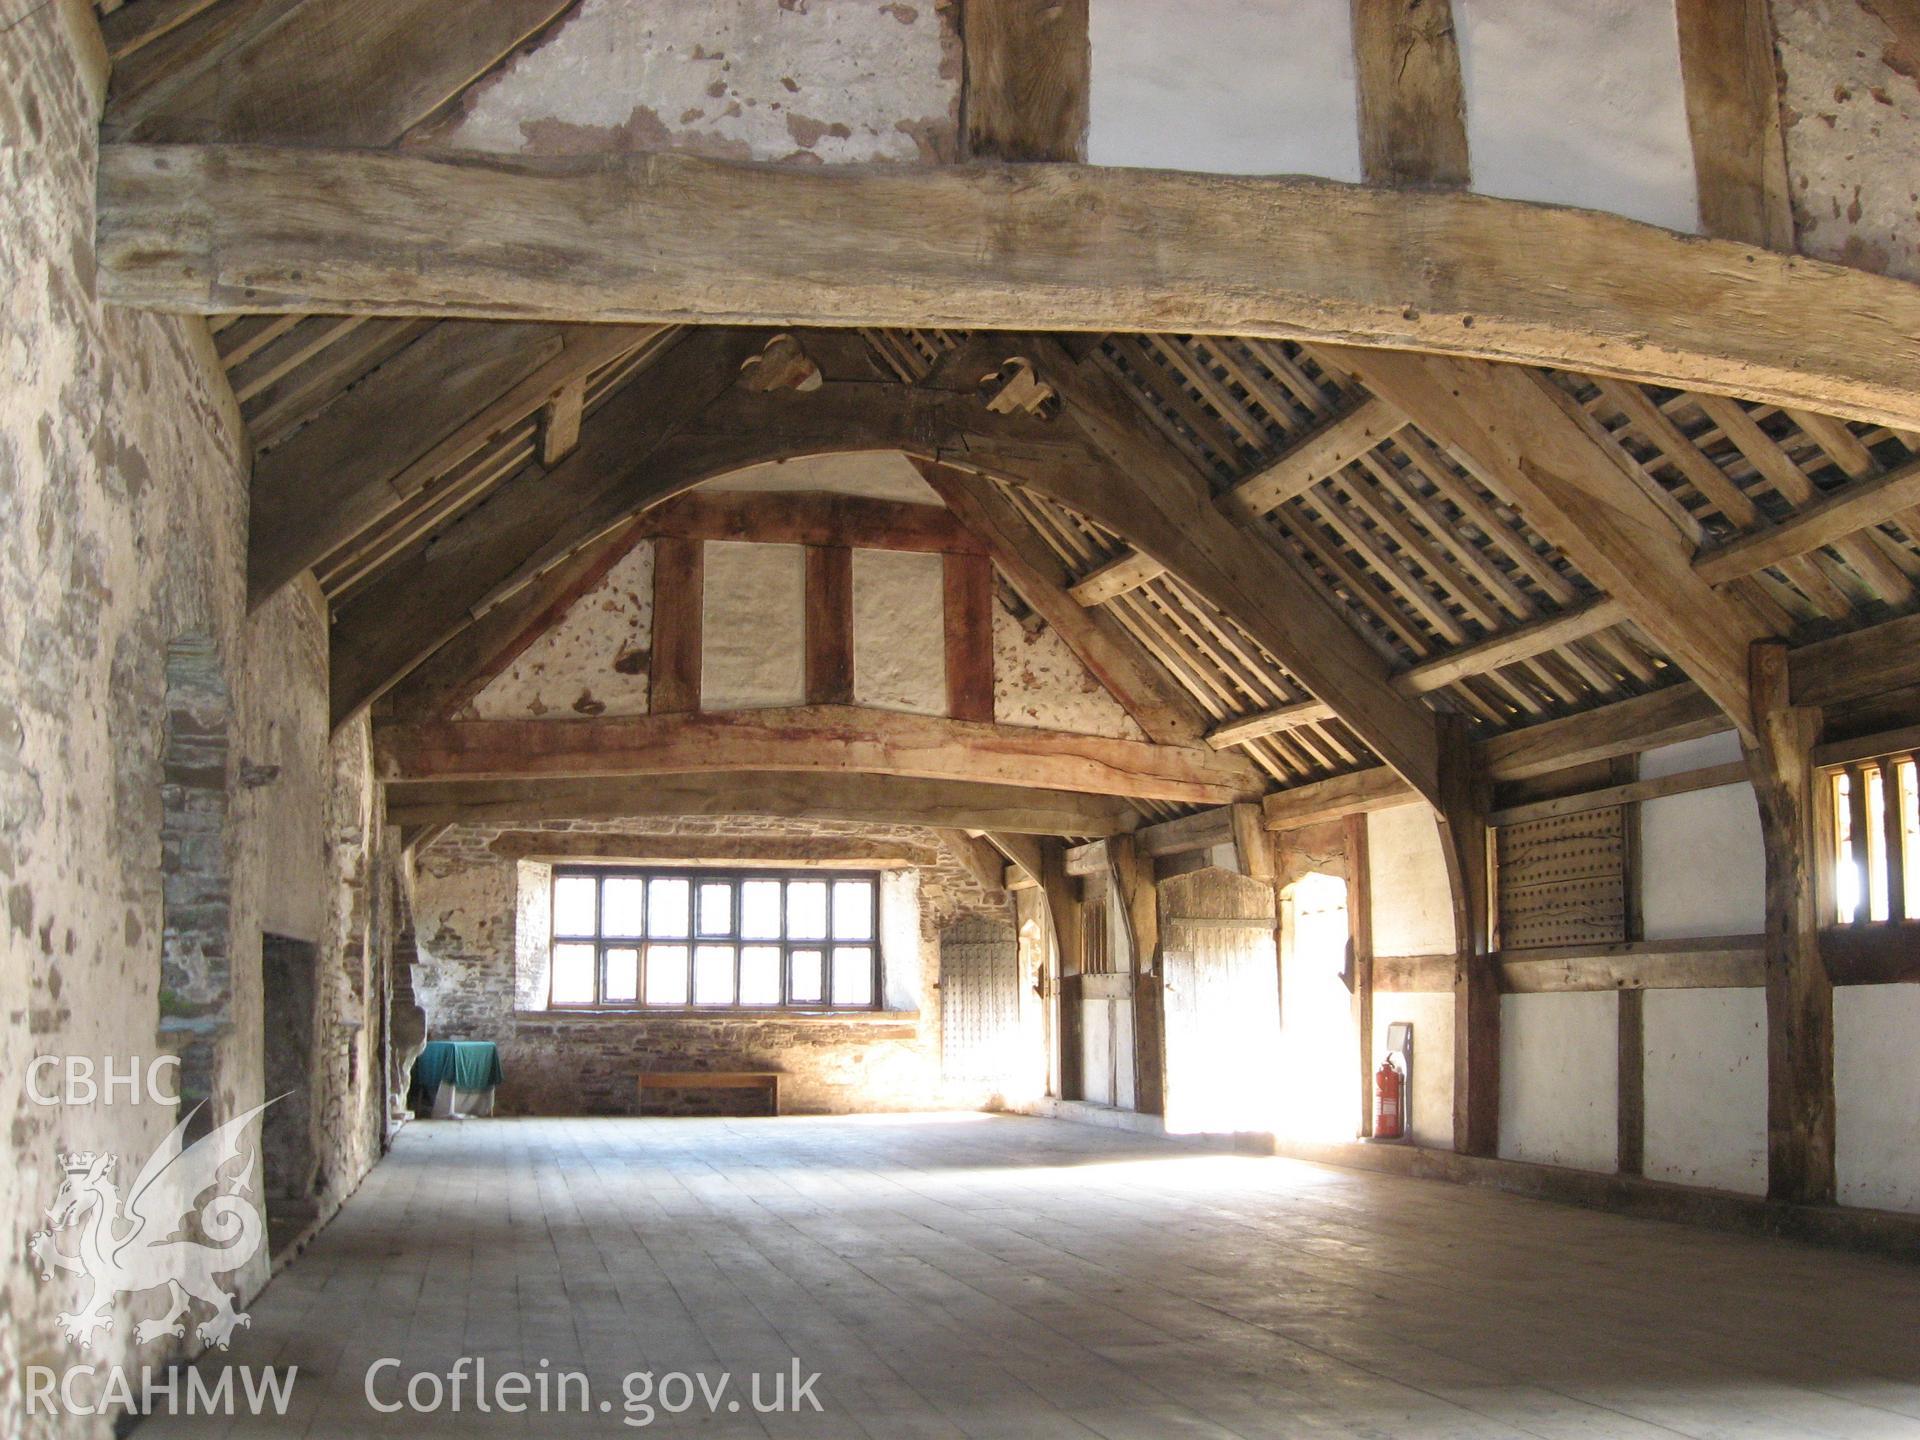 Colour photo showing an interior view of the first floor at Tretower Court, taken by Paul R. Davis, 1st January 1980.